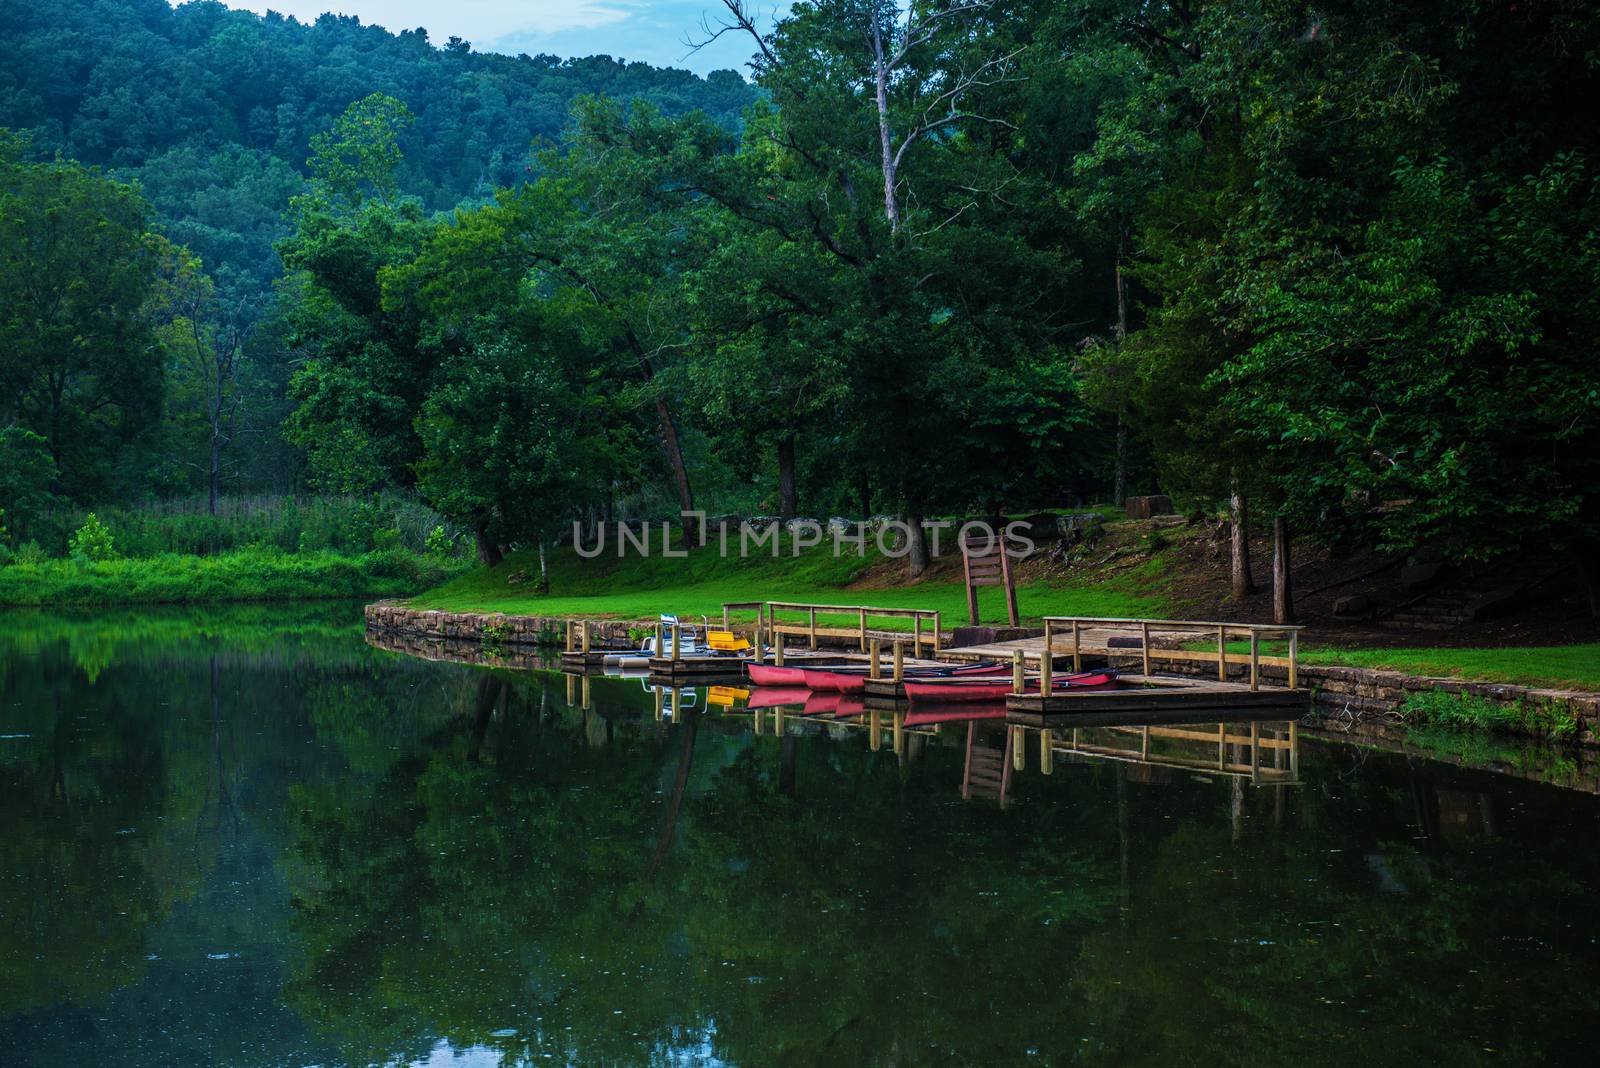 Image of the boat dock at summercamp